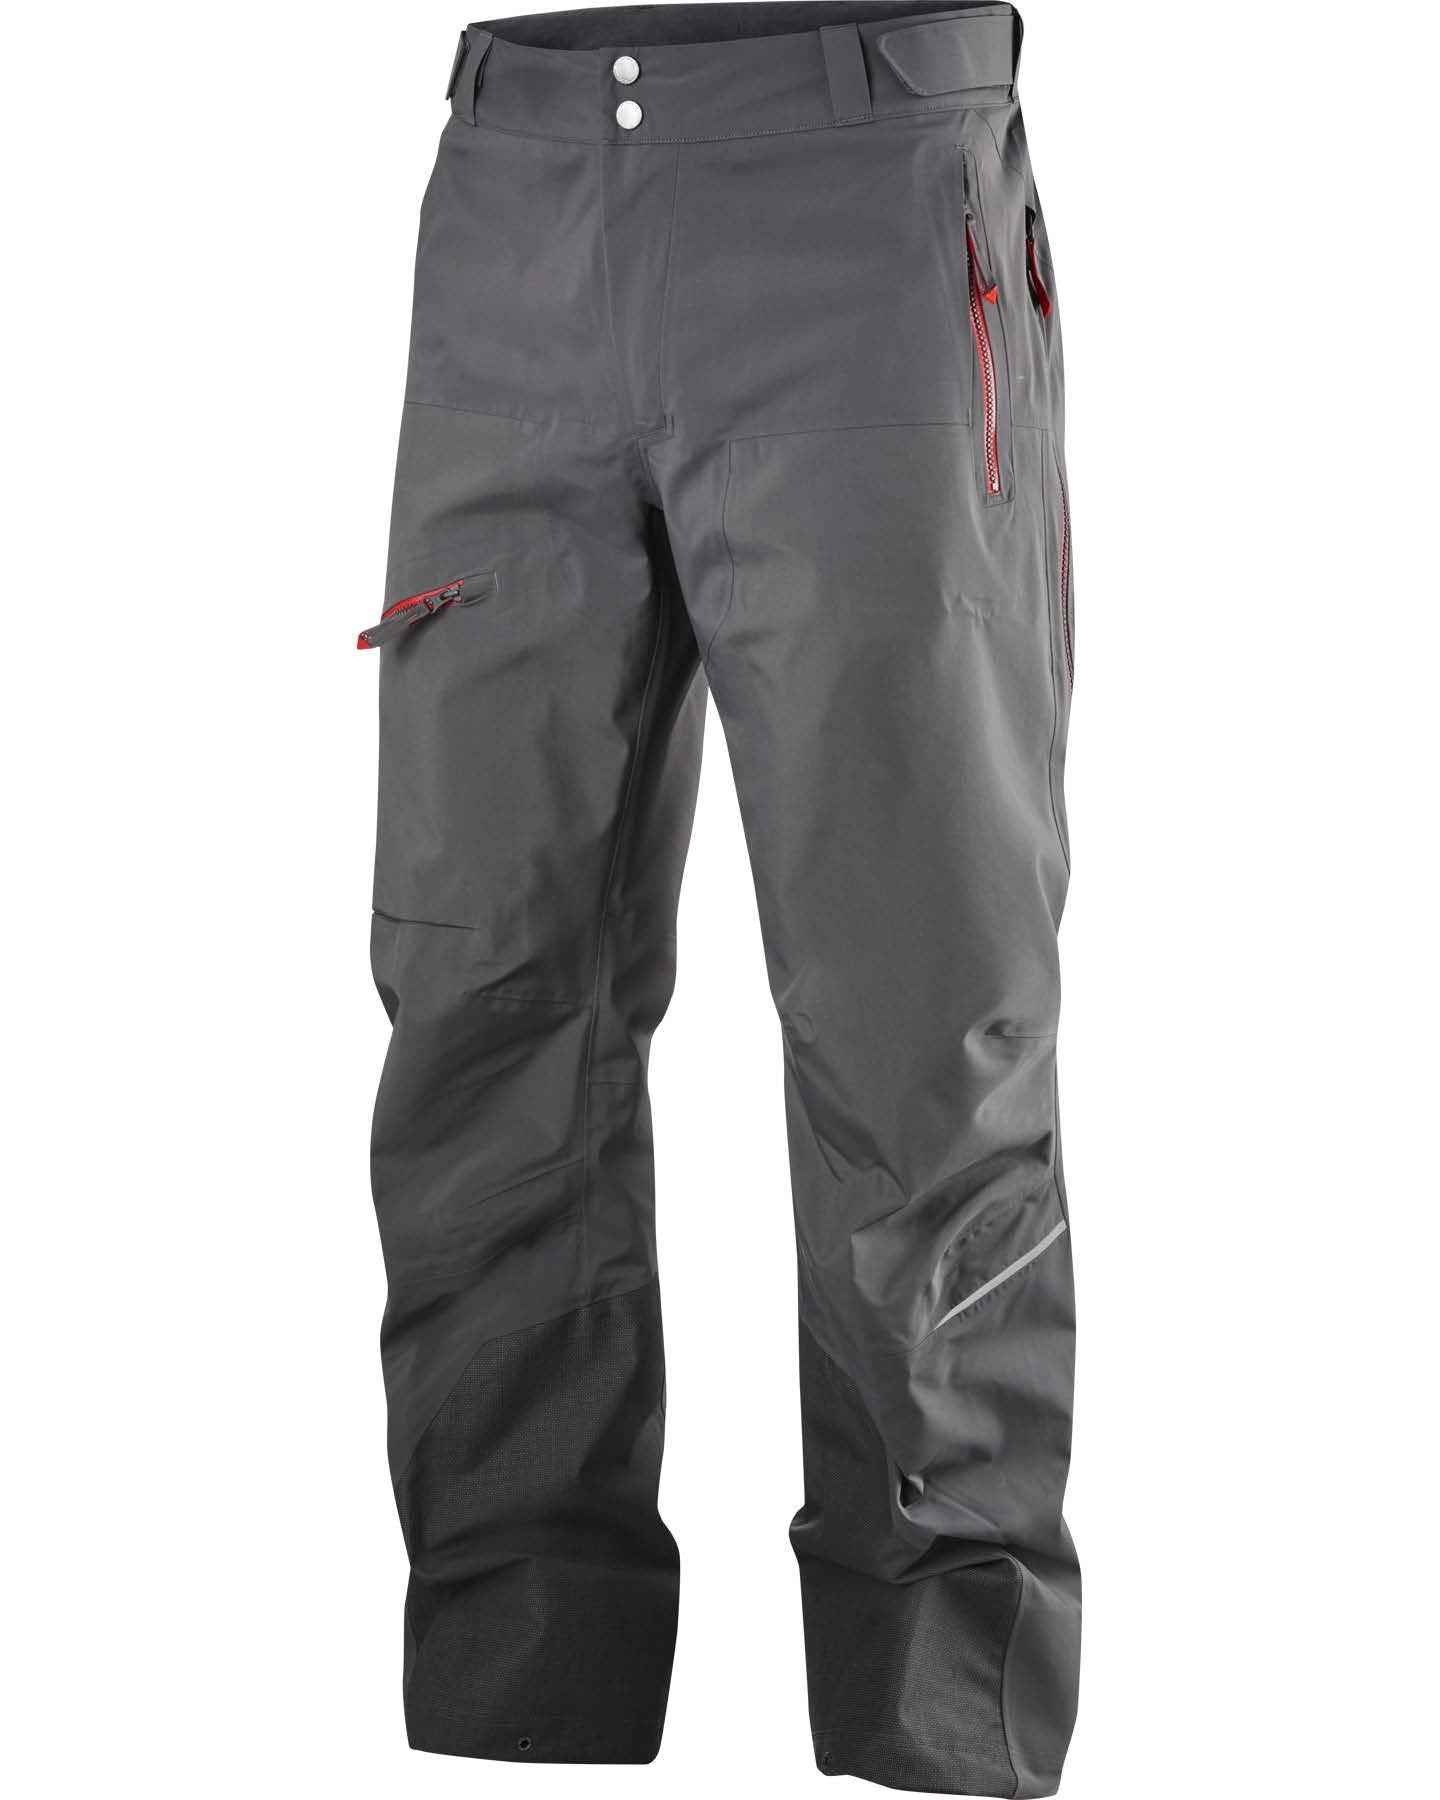 FALL/WINTER 2015 ROC RESCUE PANT MEN The Swiss Alpine Rescue Team asked Haglöfs to develop a pant, specifically for their purposes. The result was the Roc Rescue Pant.